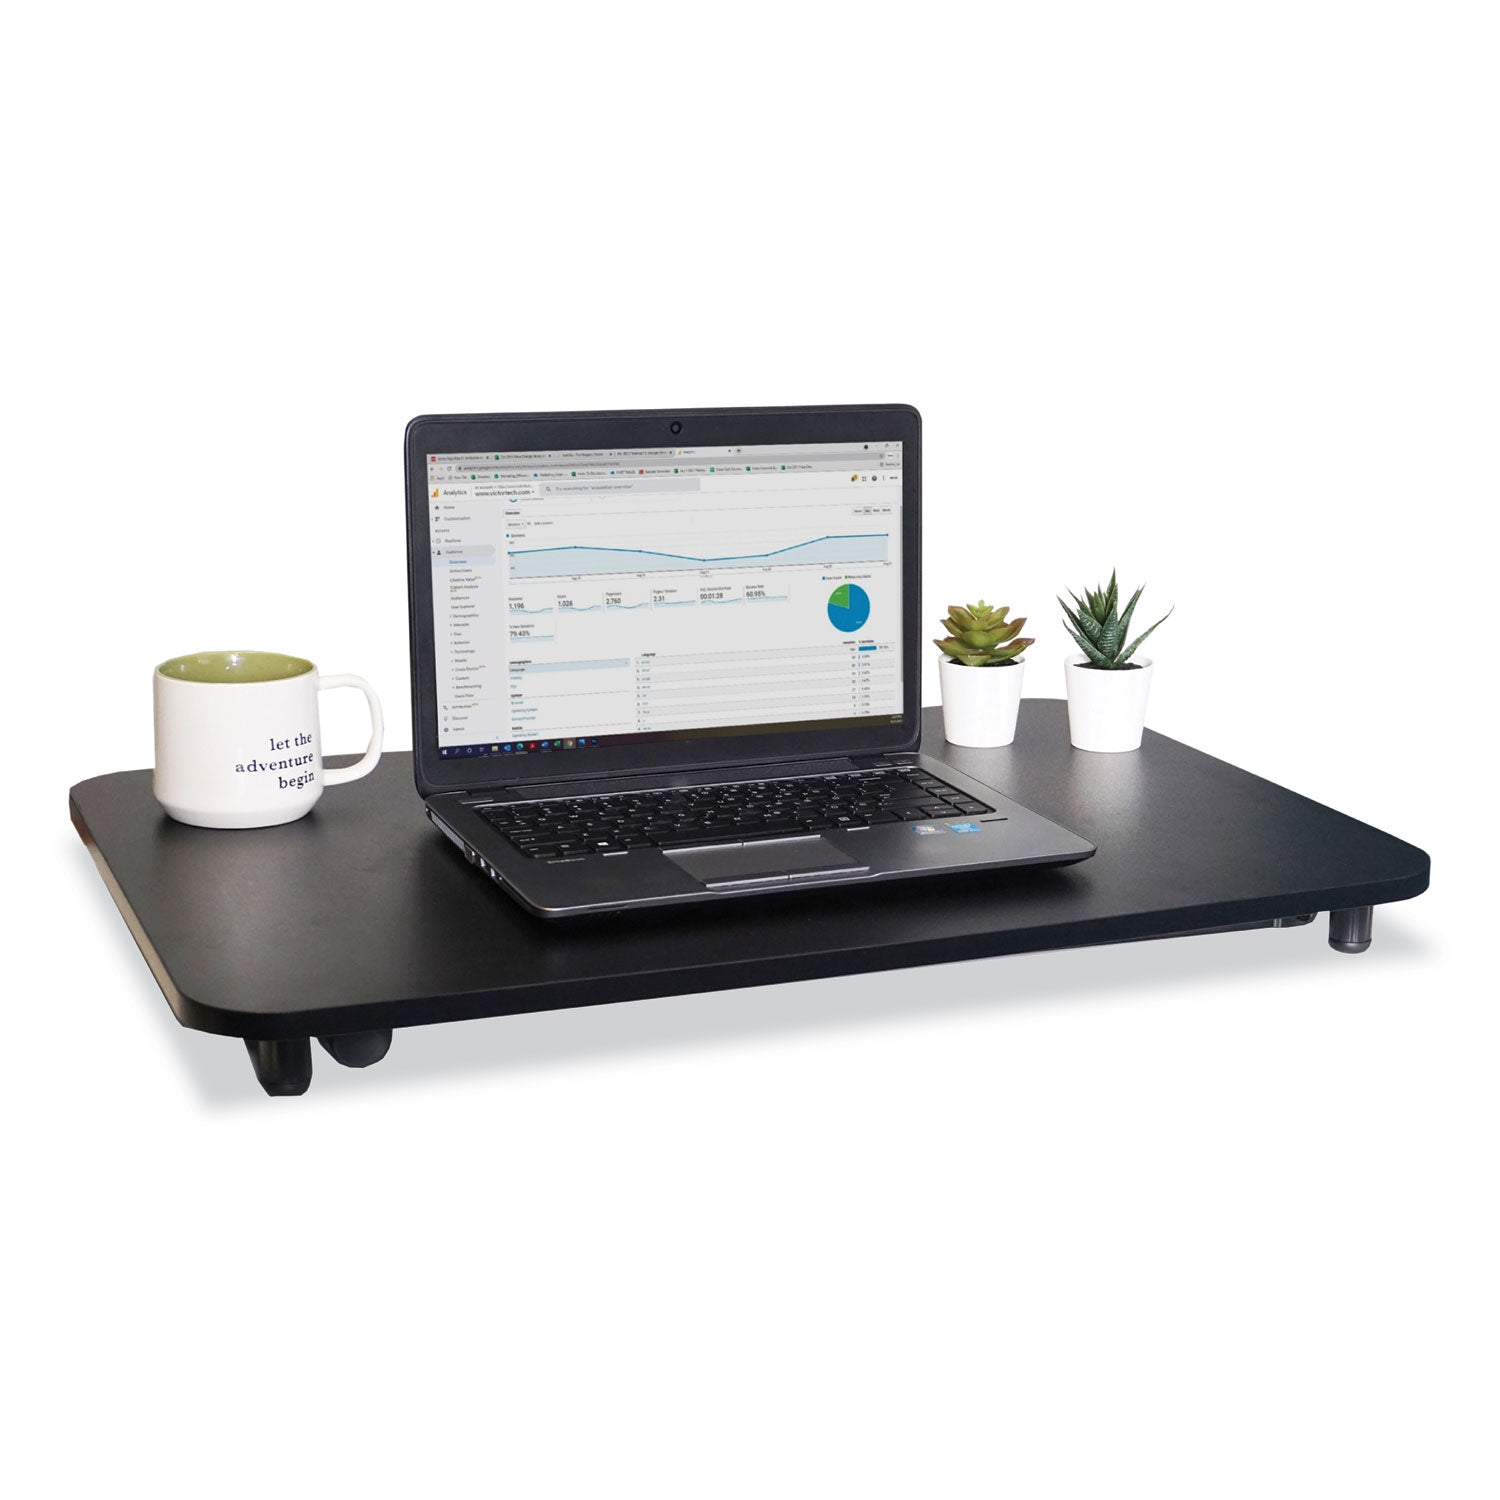 height-adjustable-laptop-standing-desk-288-x-185-x-26-to-16-black-ships-in-1-3-business-days_vctdcx110 - 3